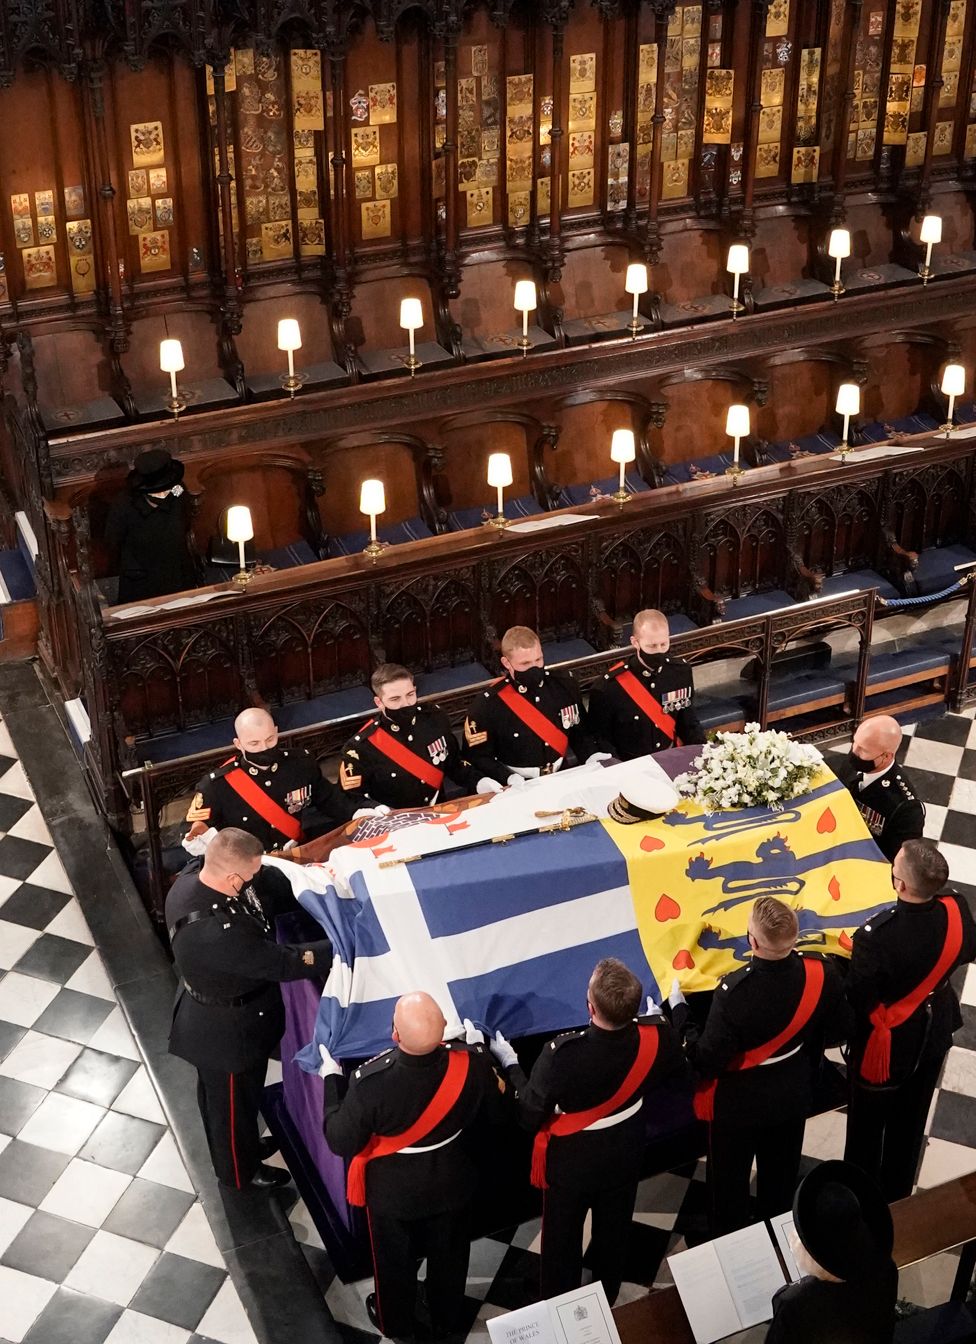 The coffin is carried into St George's Chapel during the funeral of Britain's Prince Philip, who died at the age of 99, at Windsor Castle, Britain, April 17, 2021.